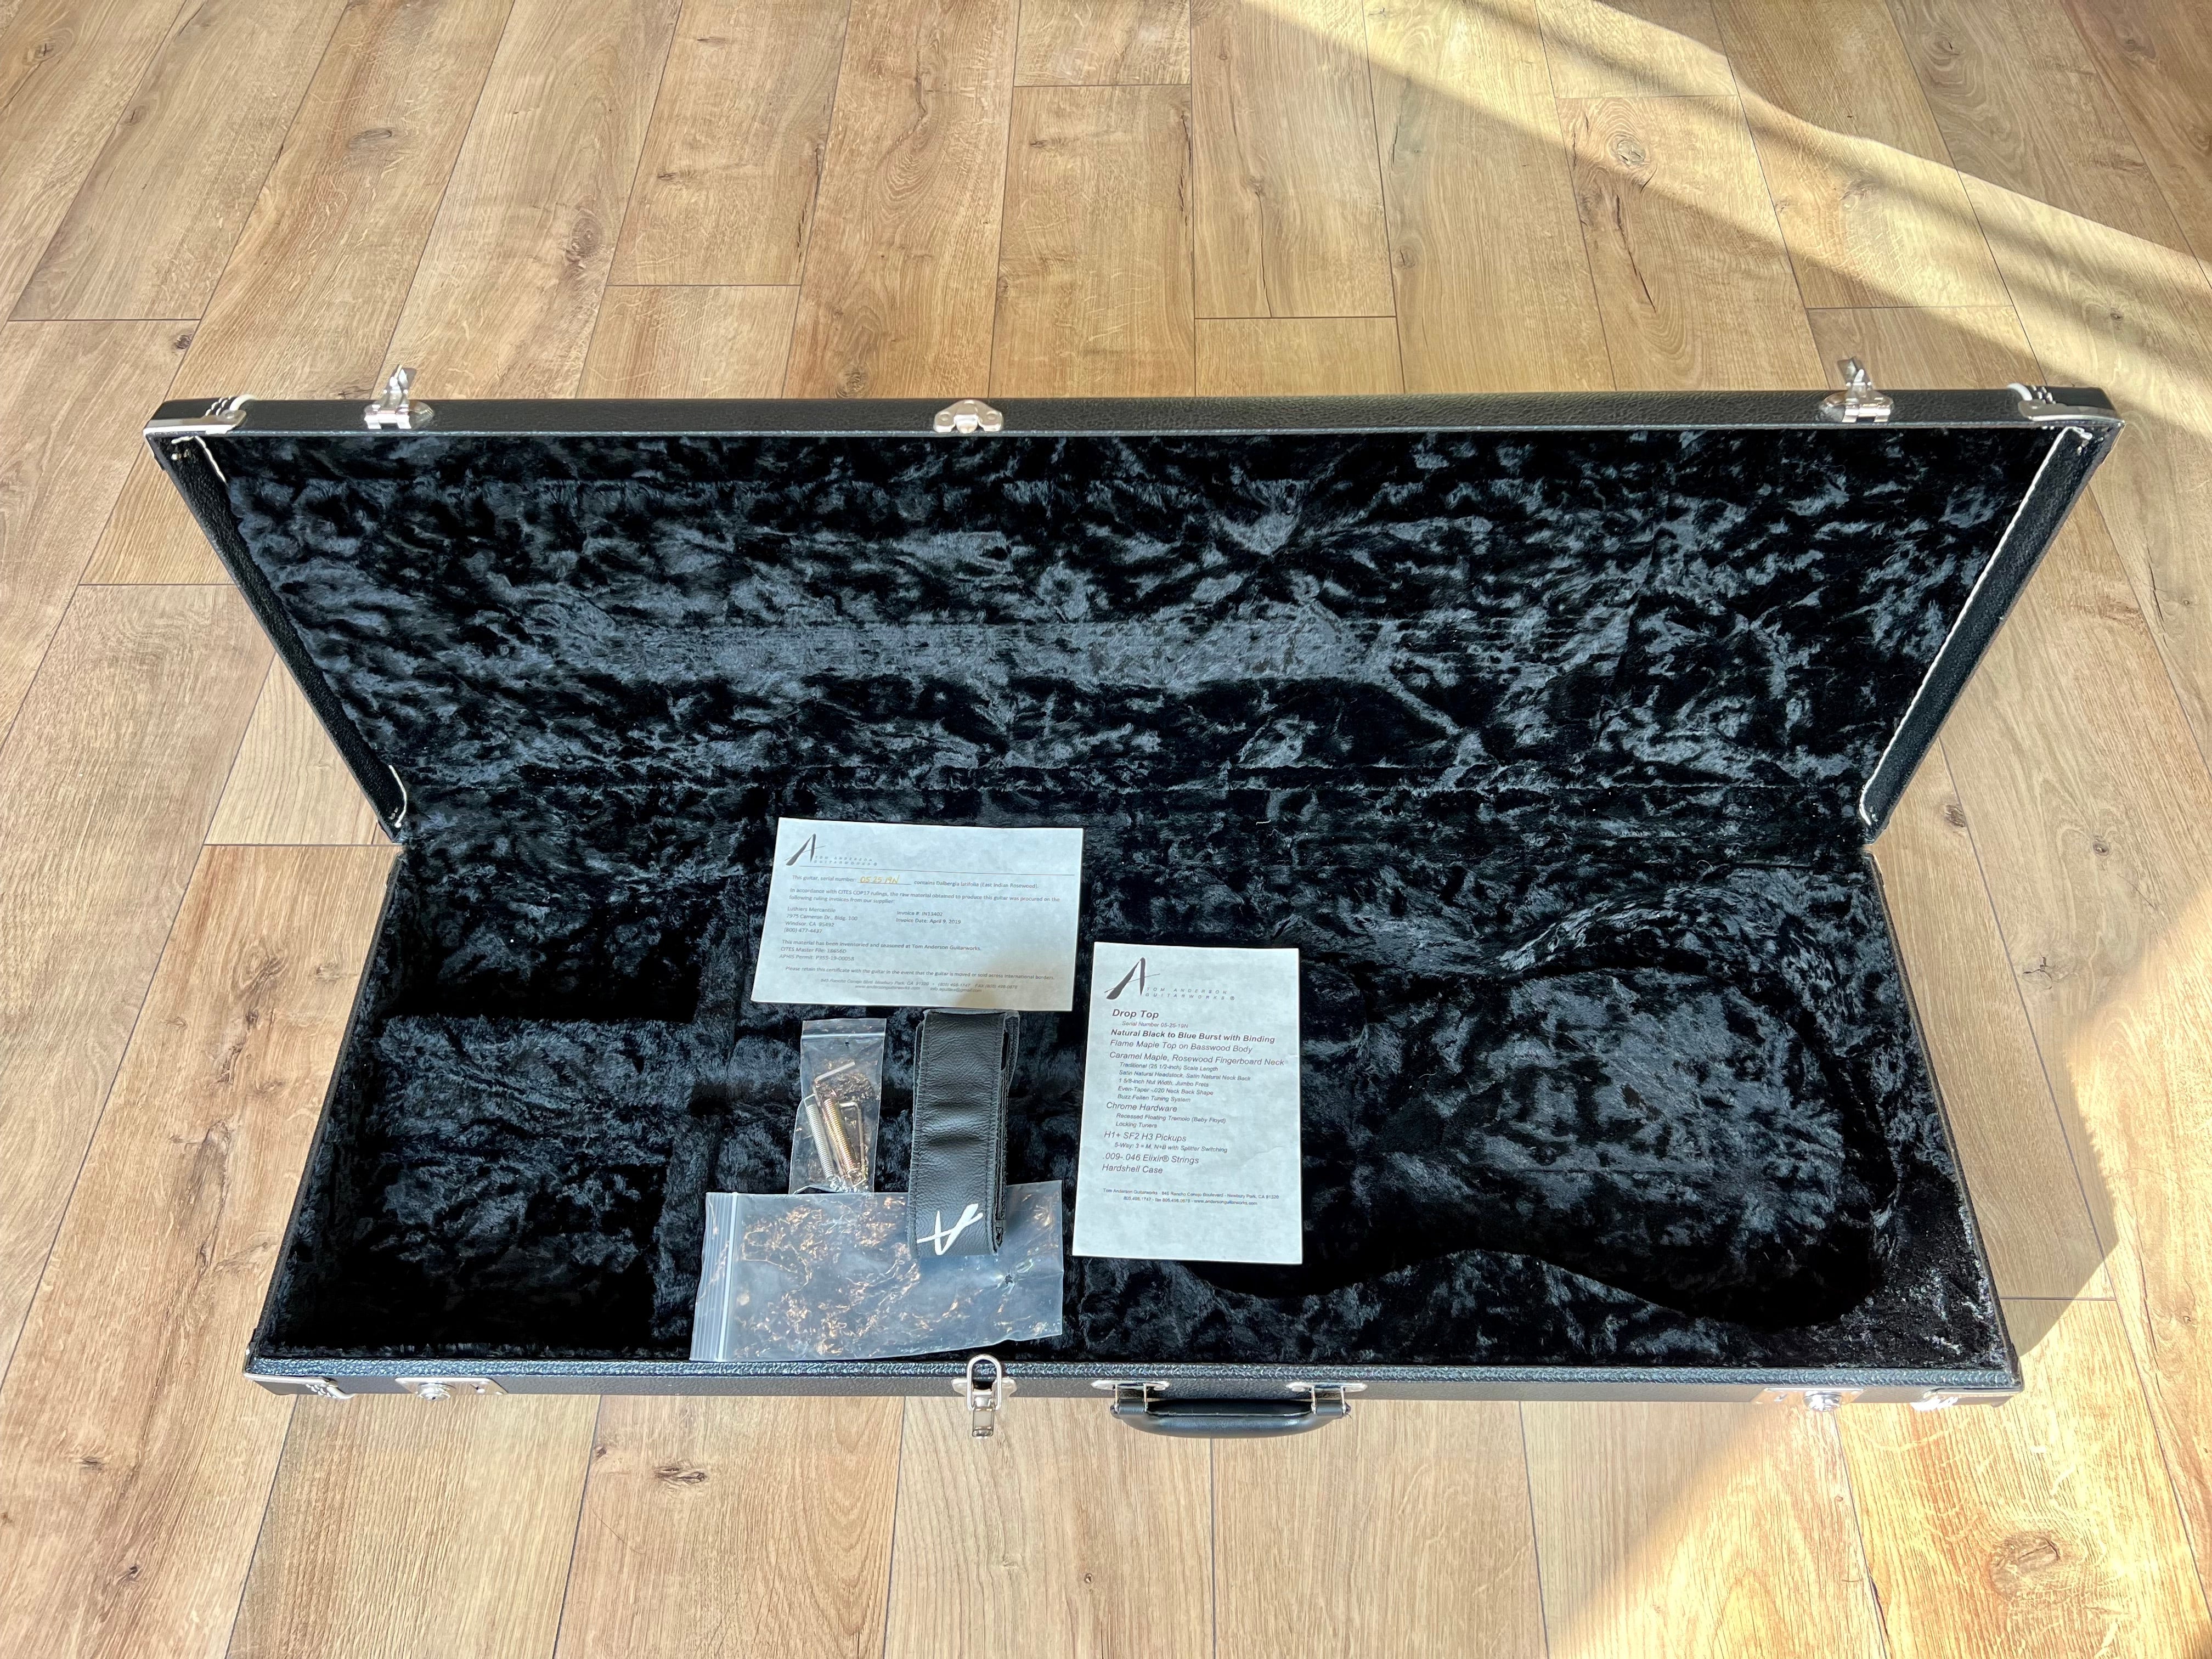 Tom Anderson Drop Top 2019 hard-case inside with accessories